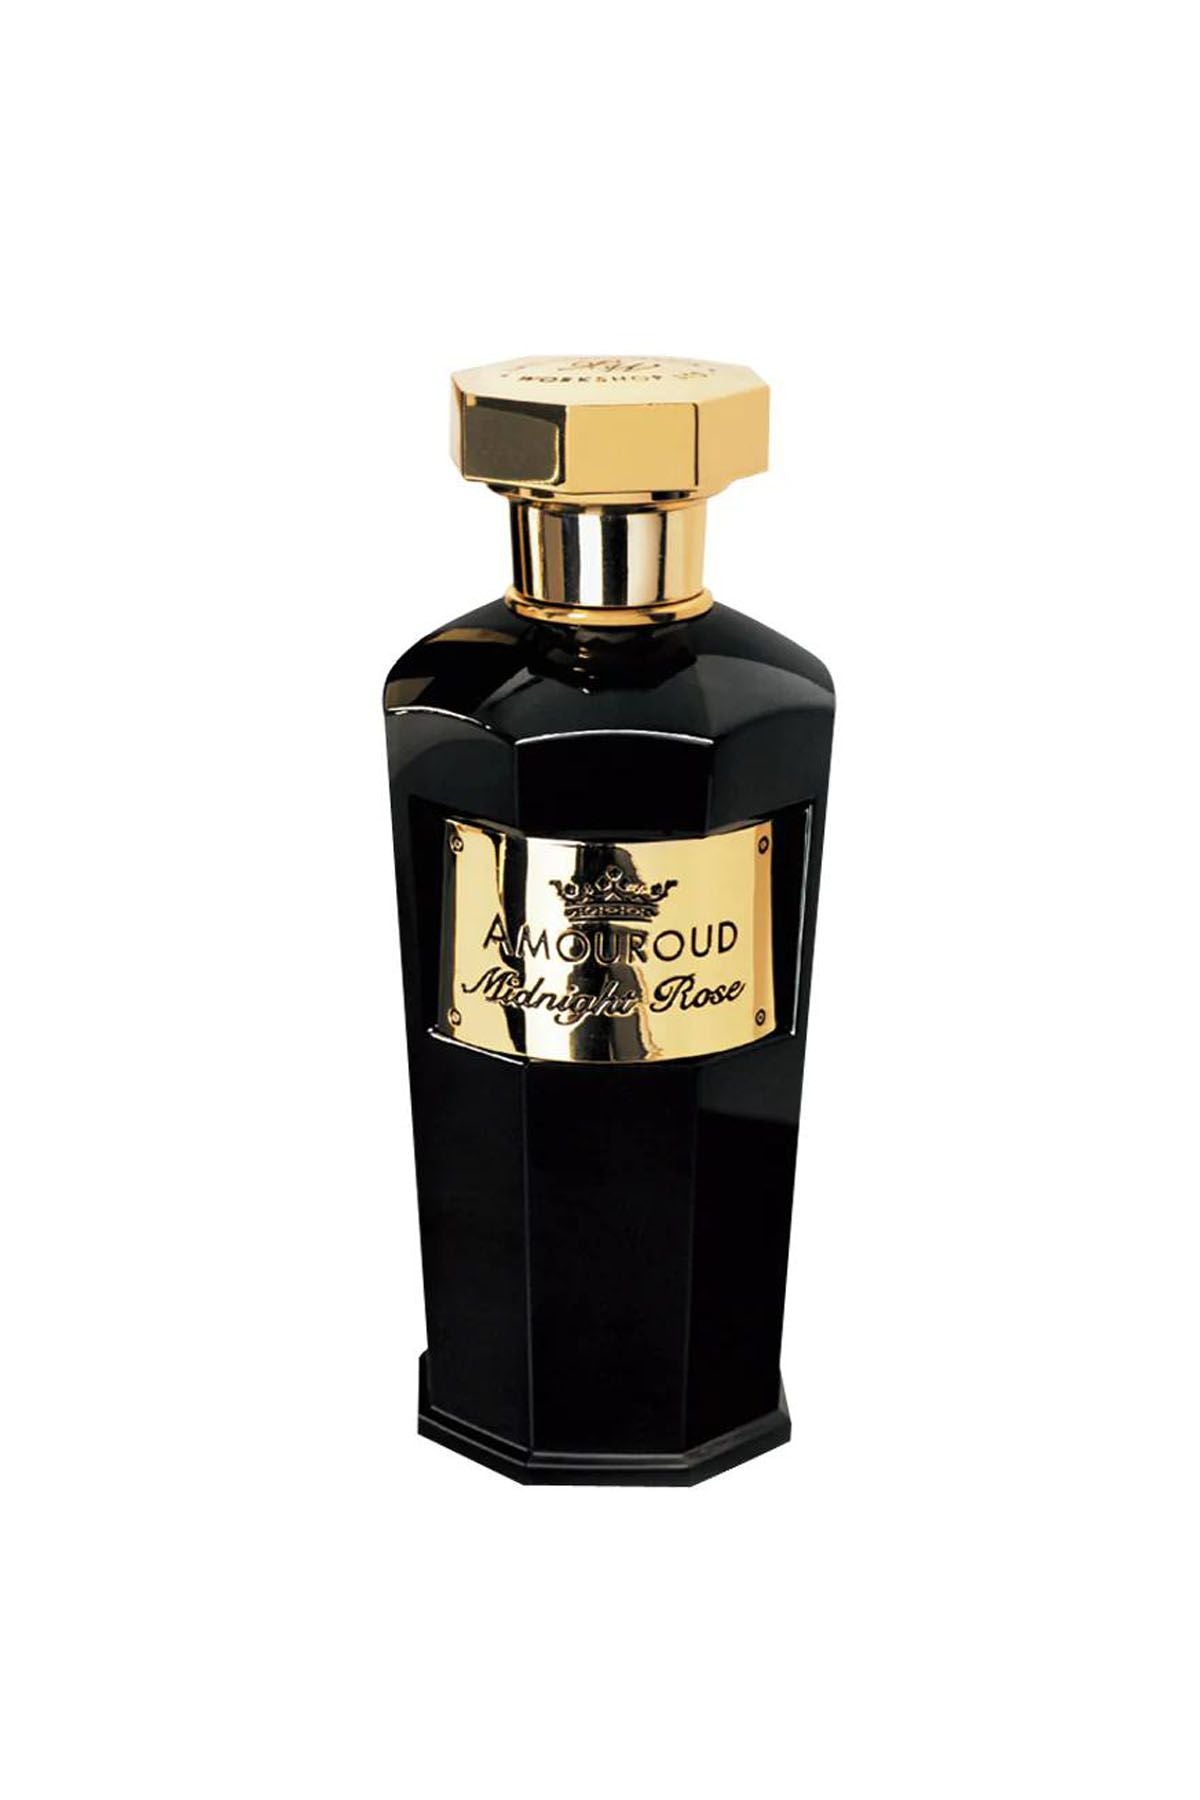 Tester - Amouroud Midnight Rose EDP M 100ml Tester (Rare Selection)